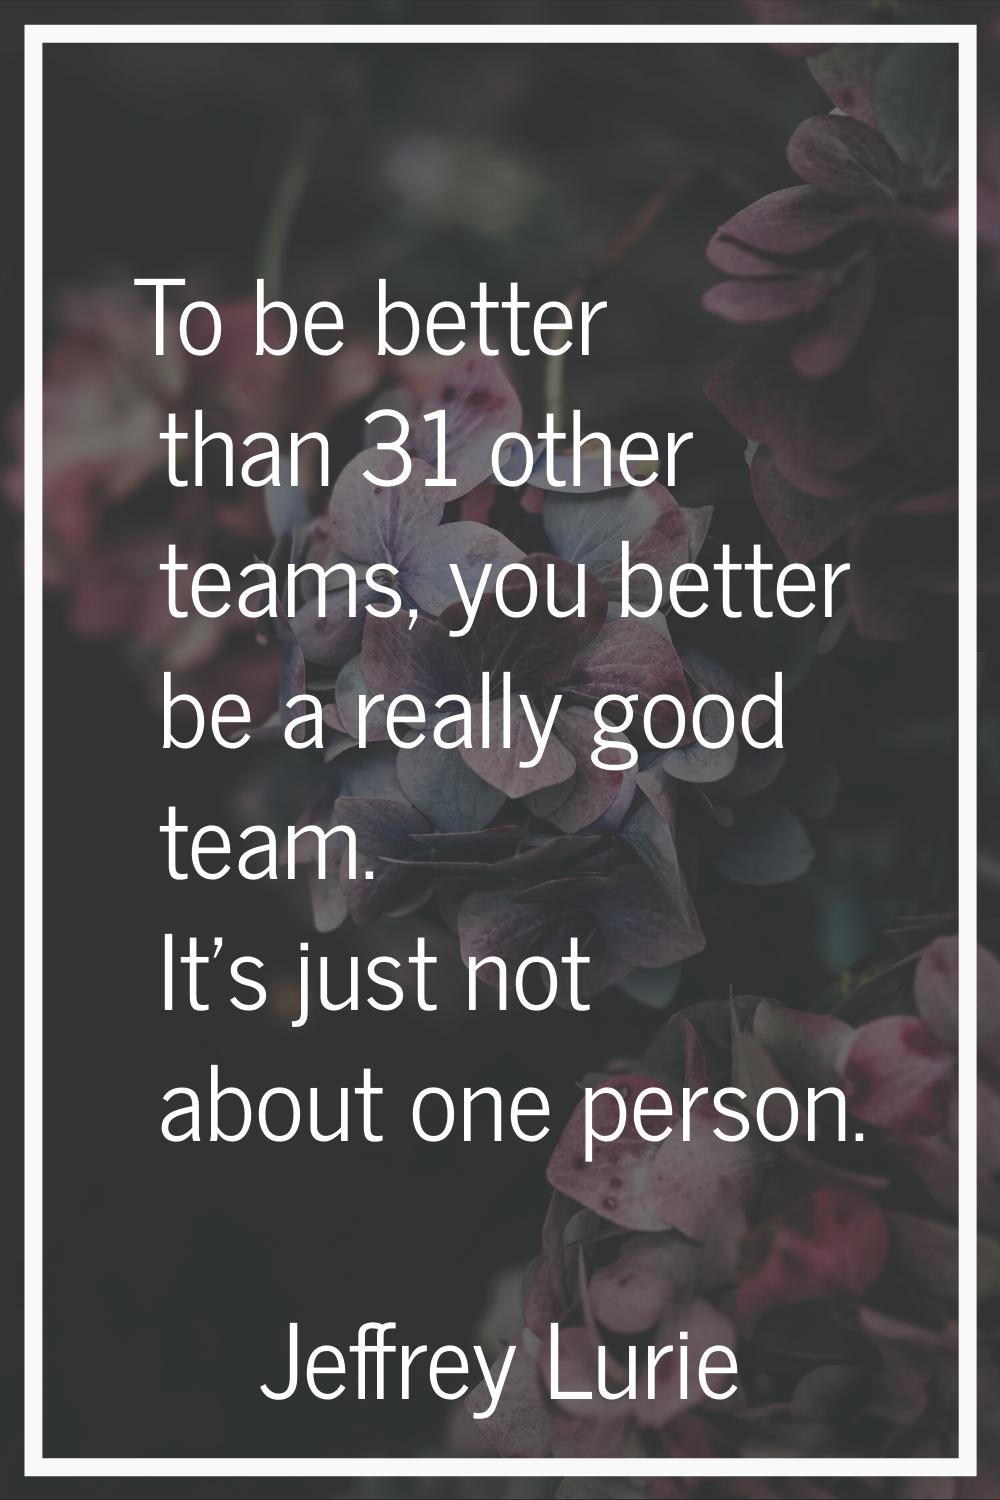 To be better than 31 other teams, you better be a really good team. It's just not about one person.